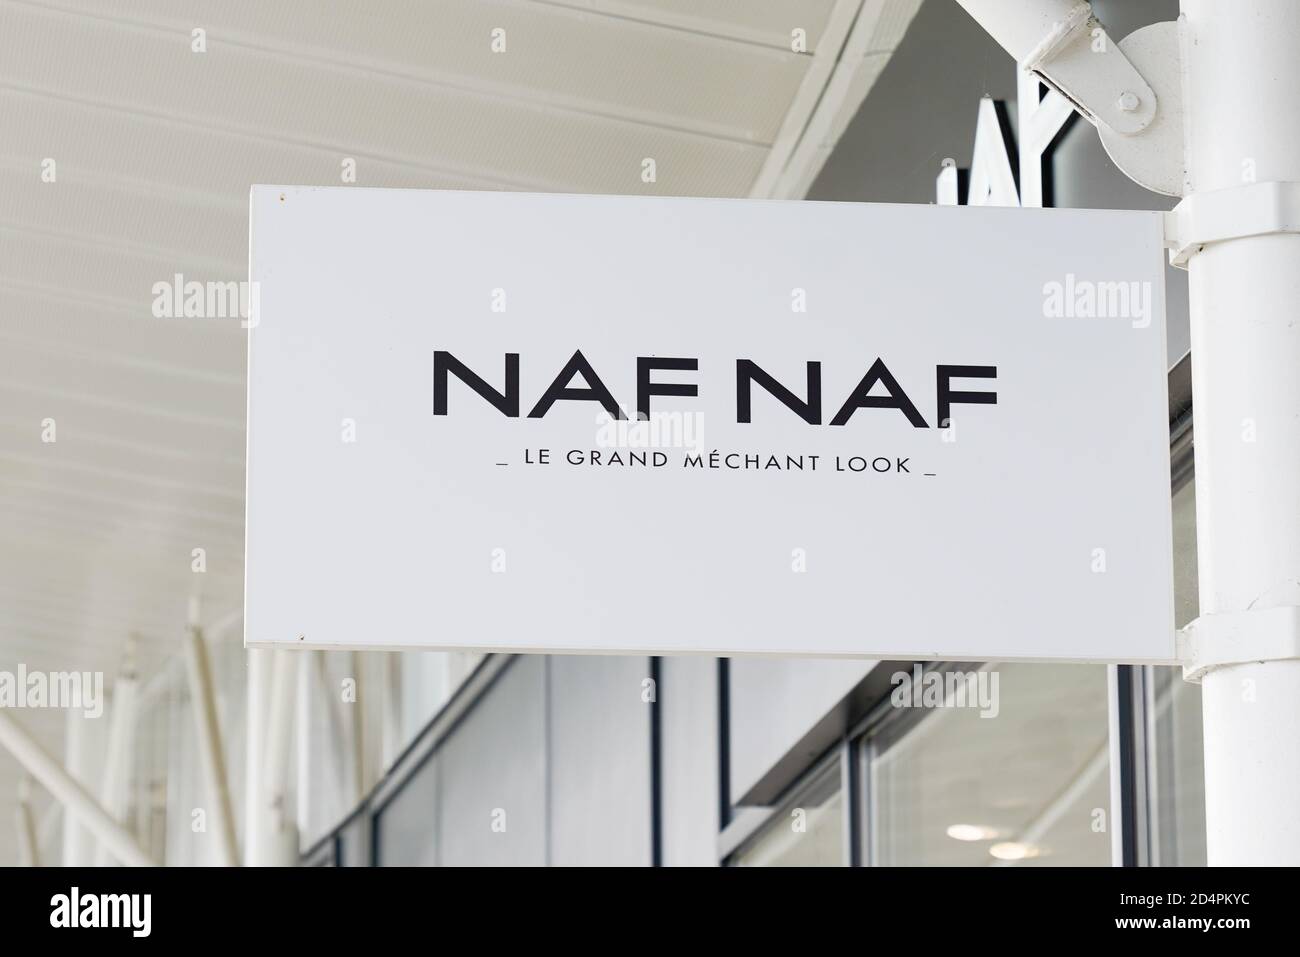 Bordeaux , Aquitaine / France - 10 01 2020 : naf naf logo and text sign  front of fashion shop Stock Photo - Alamy